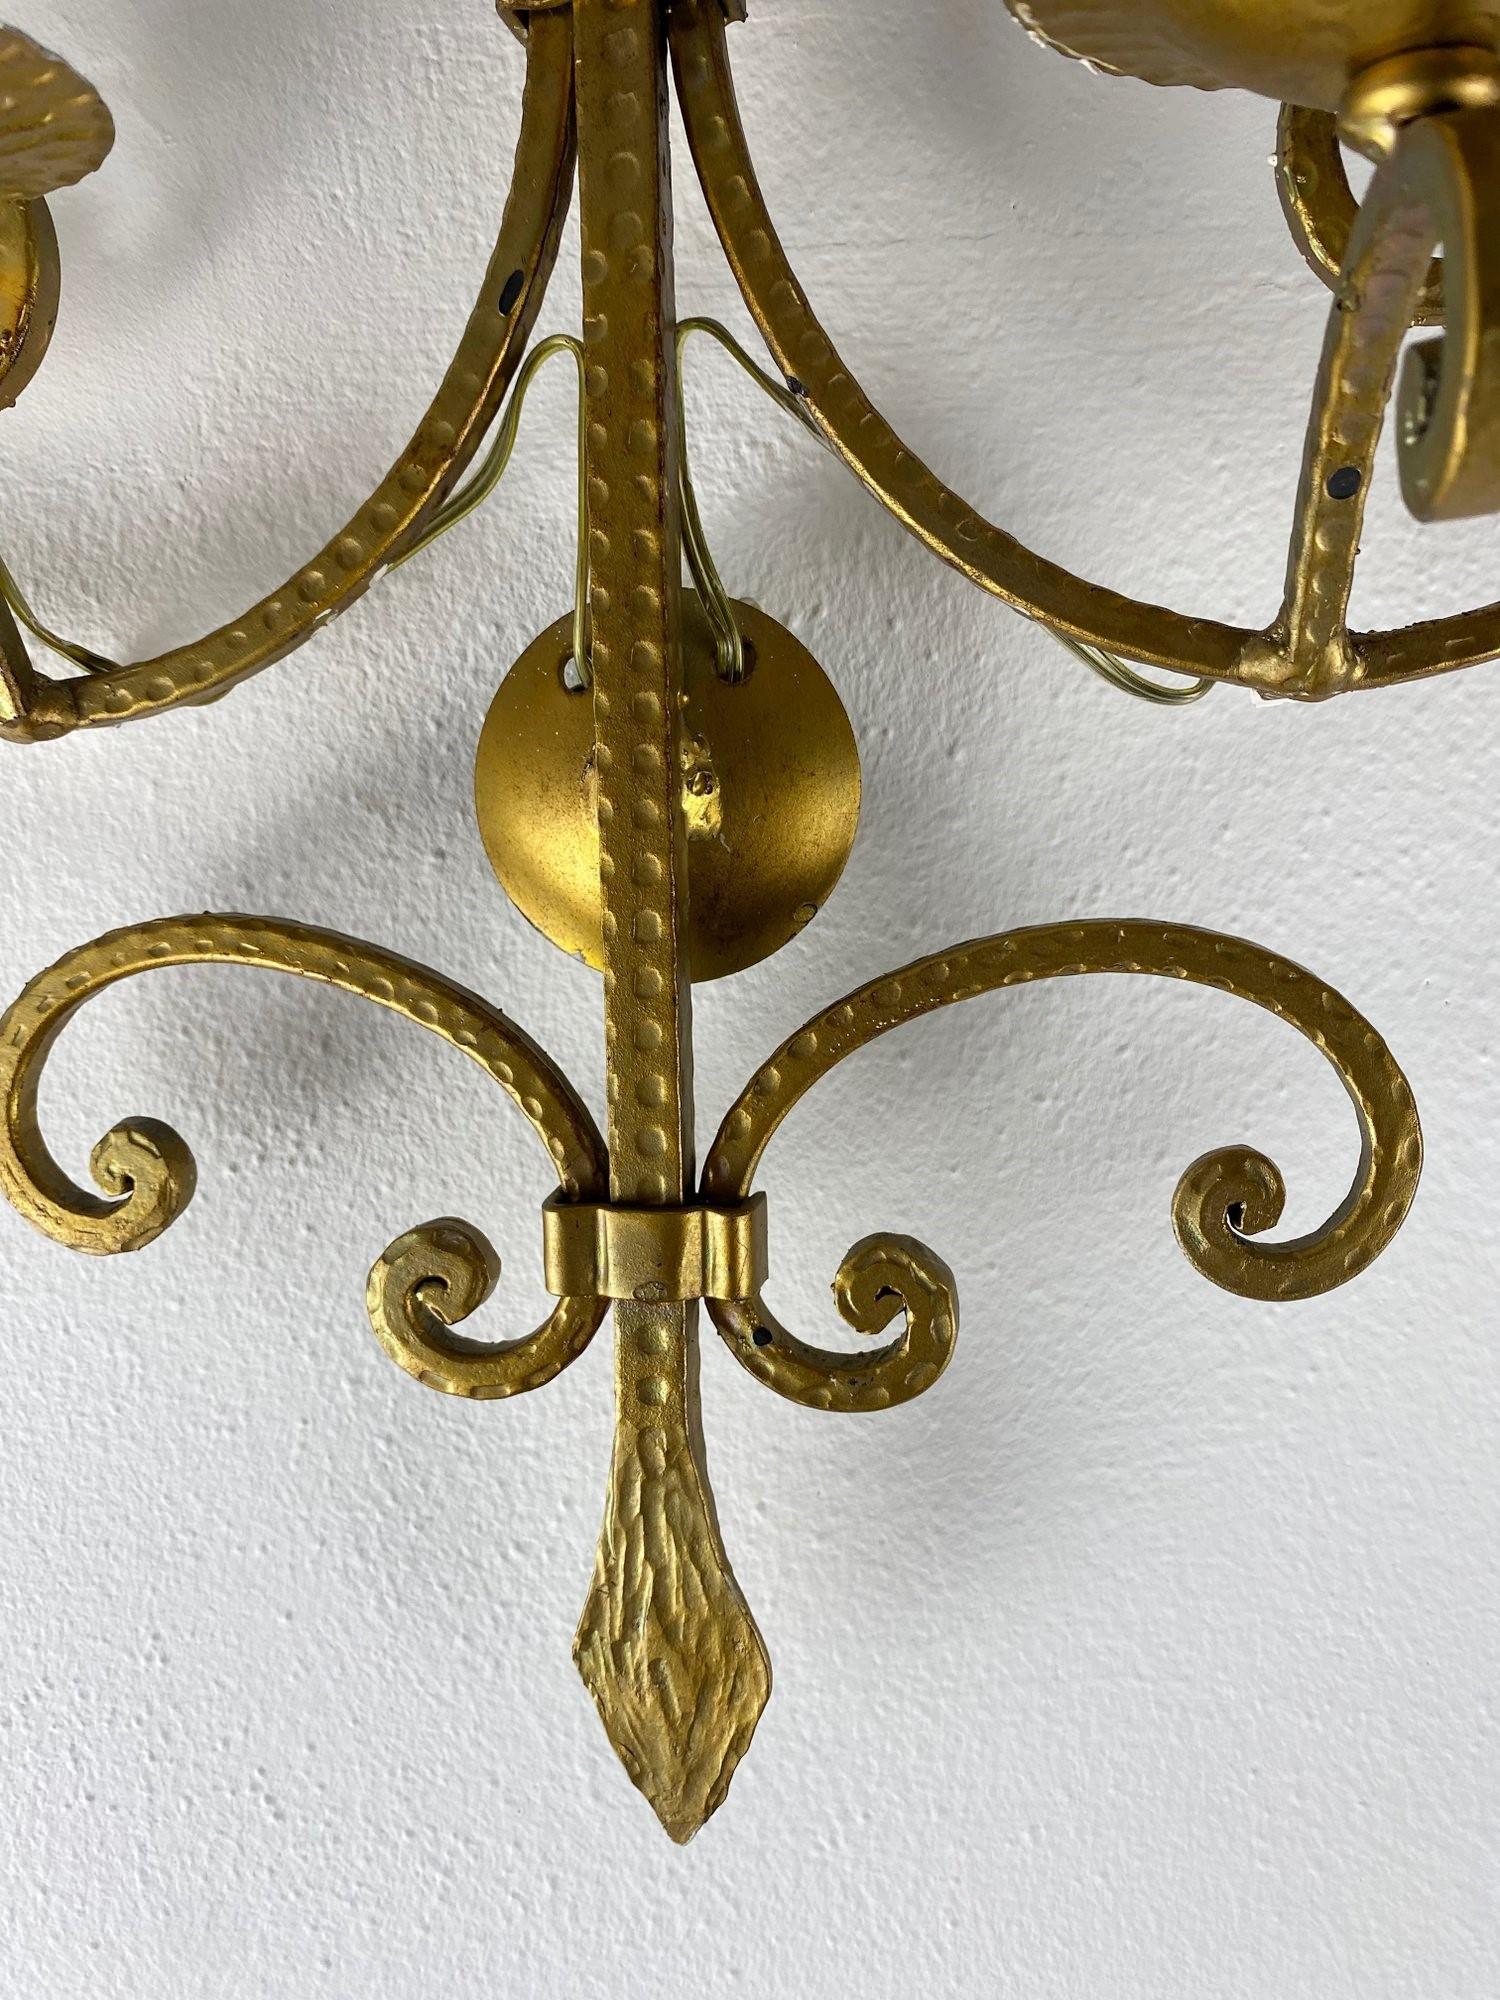 Pair of French Wrought Iron Two-light Wall Sconces, 1930s For Sale 2